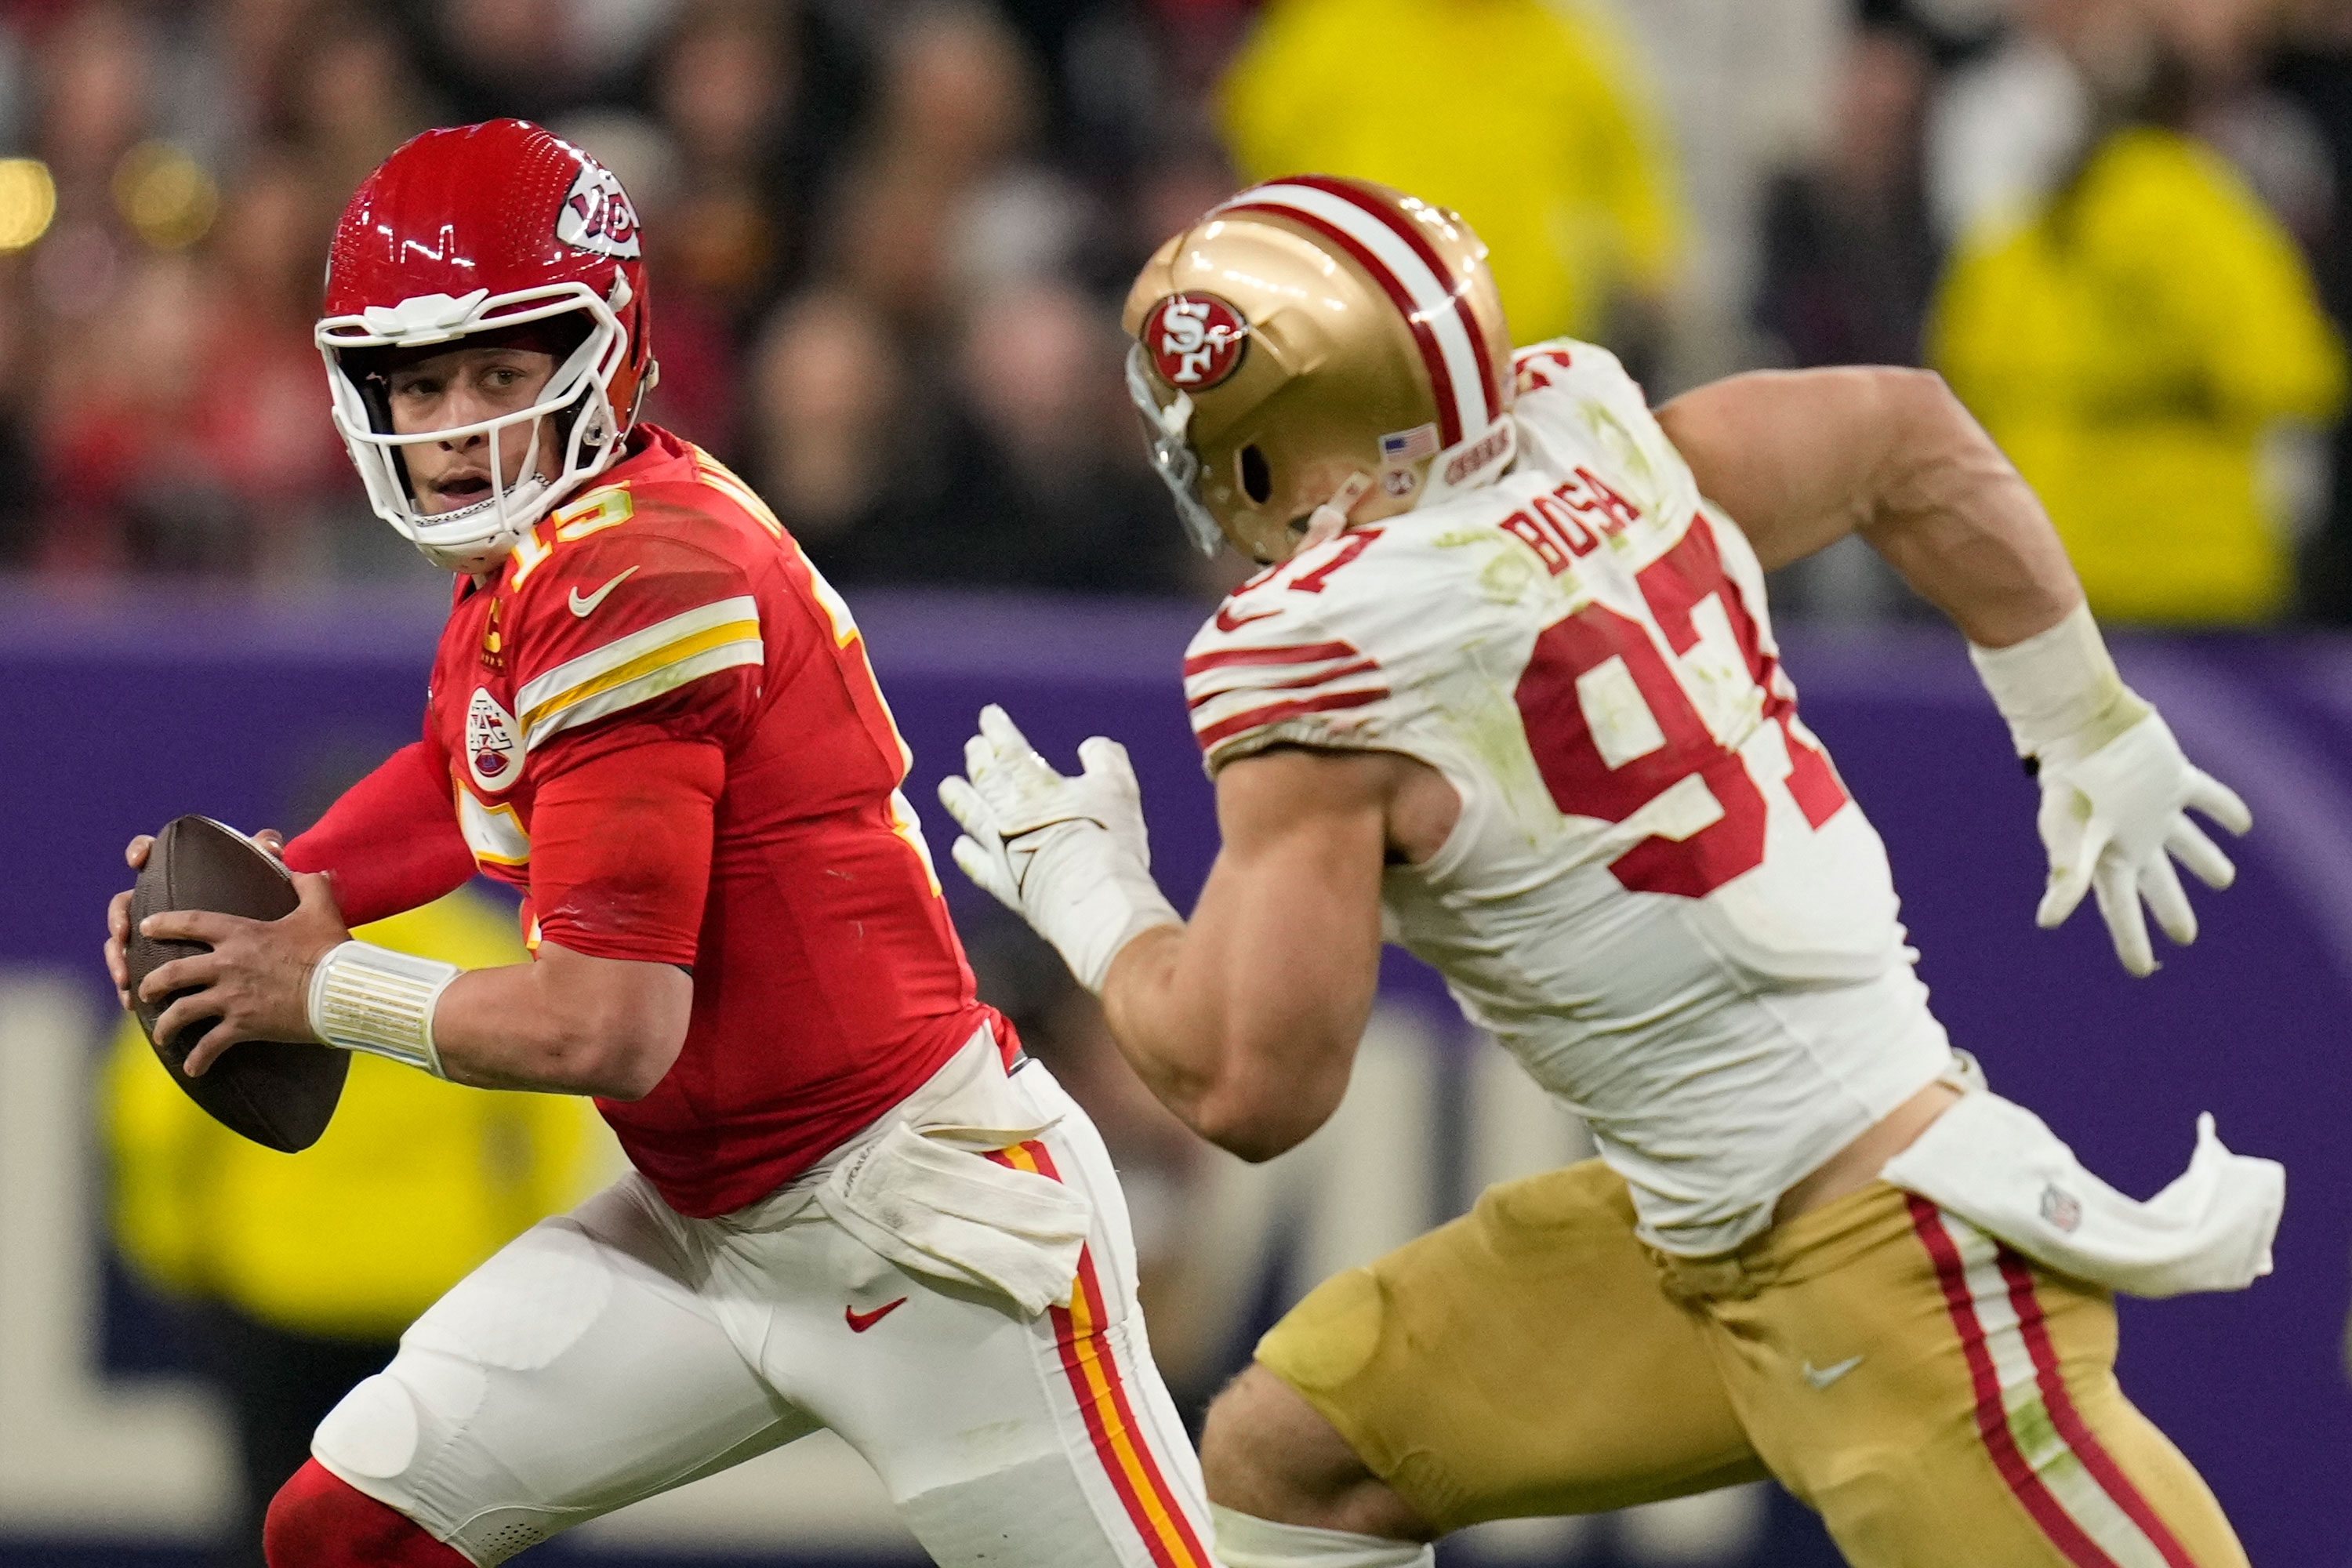 San Francisco 49ers defensive end Nick Bosa chases Kansas City Chiefs quarterback Patrick Mahomes during the second half of the Super Bowl.